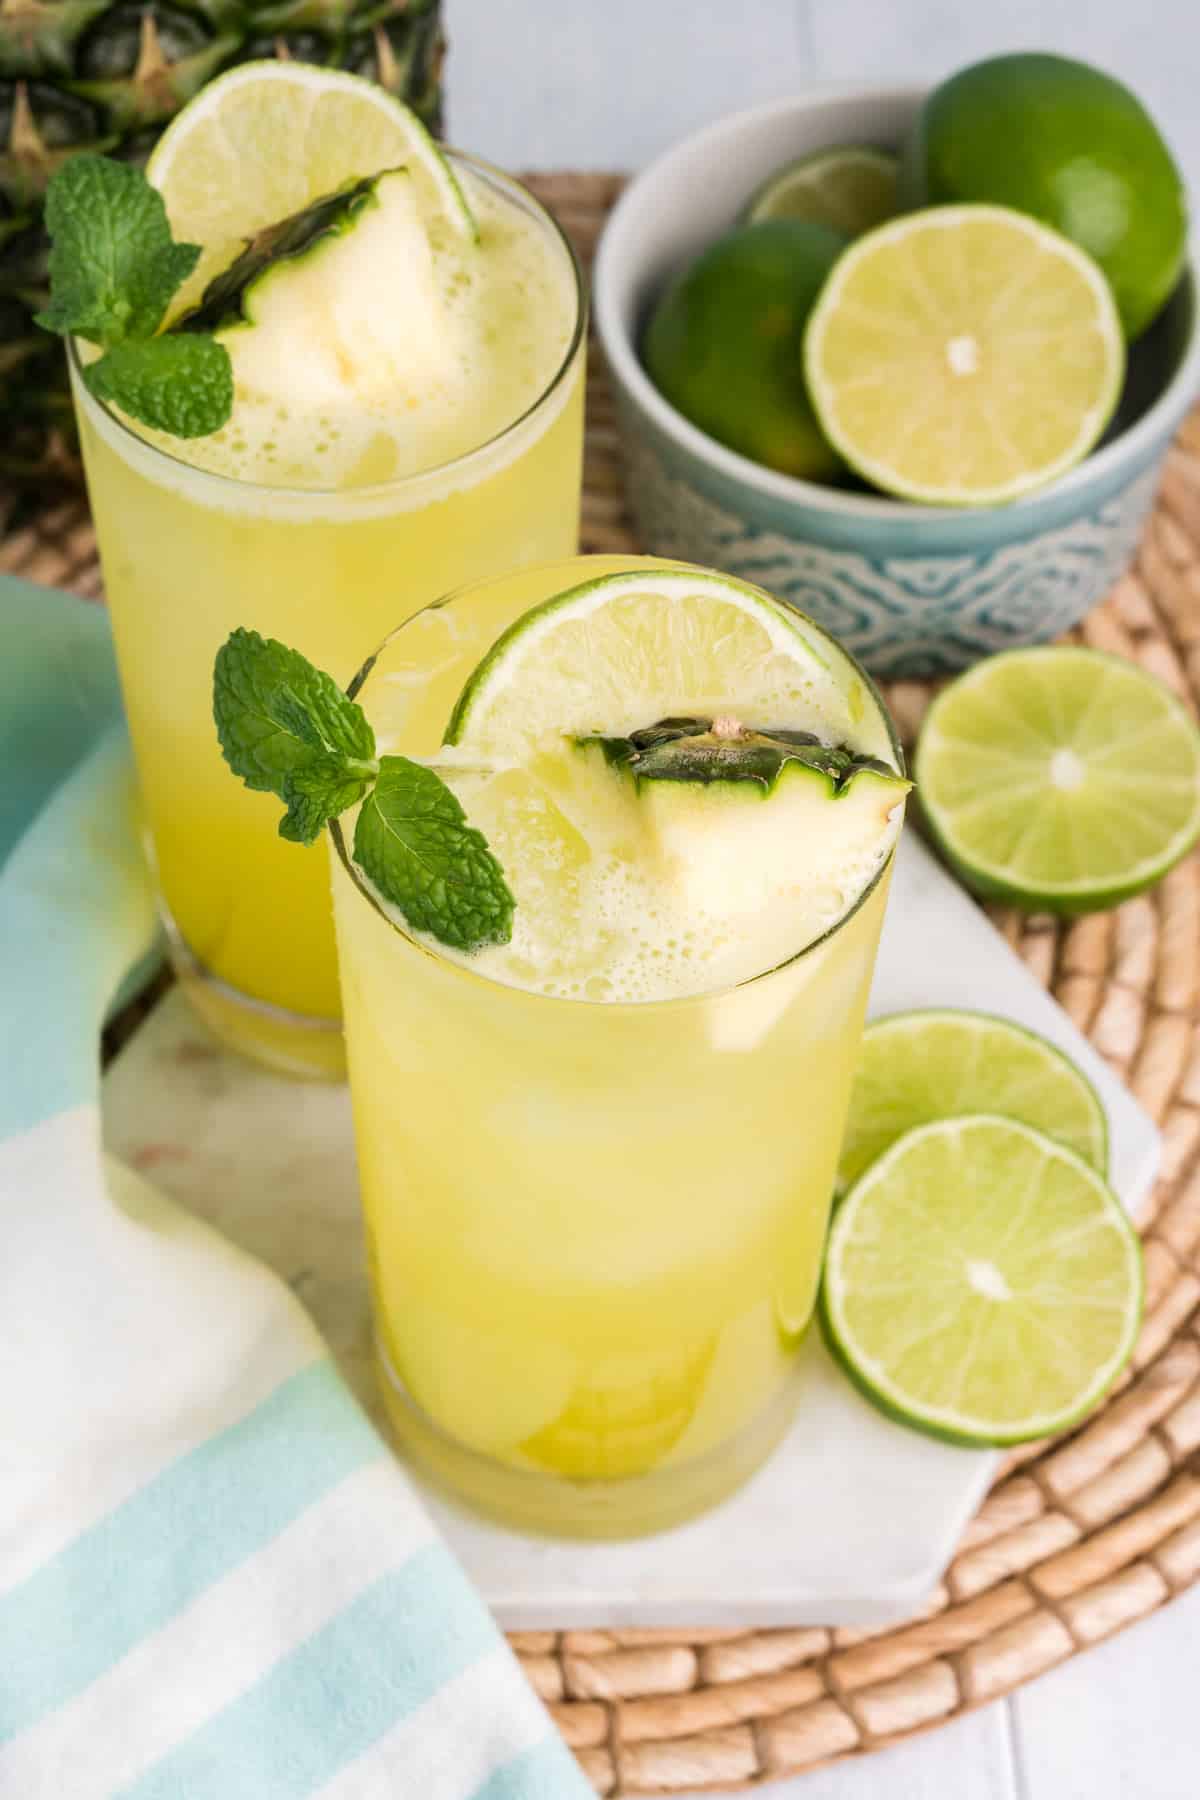 Glasses of pineapple agua fresca on the table with a bowl of limes and garnished with fresh pineapple and mint.